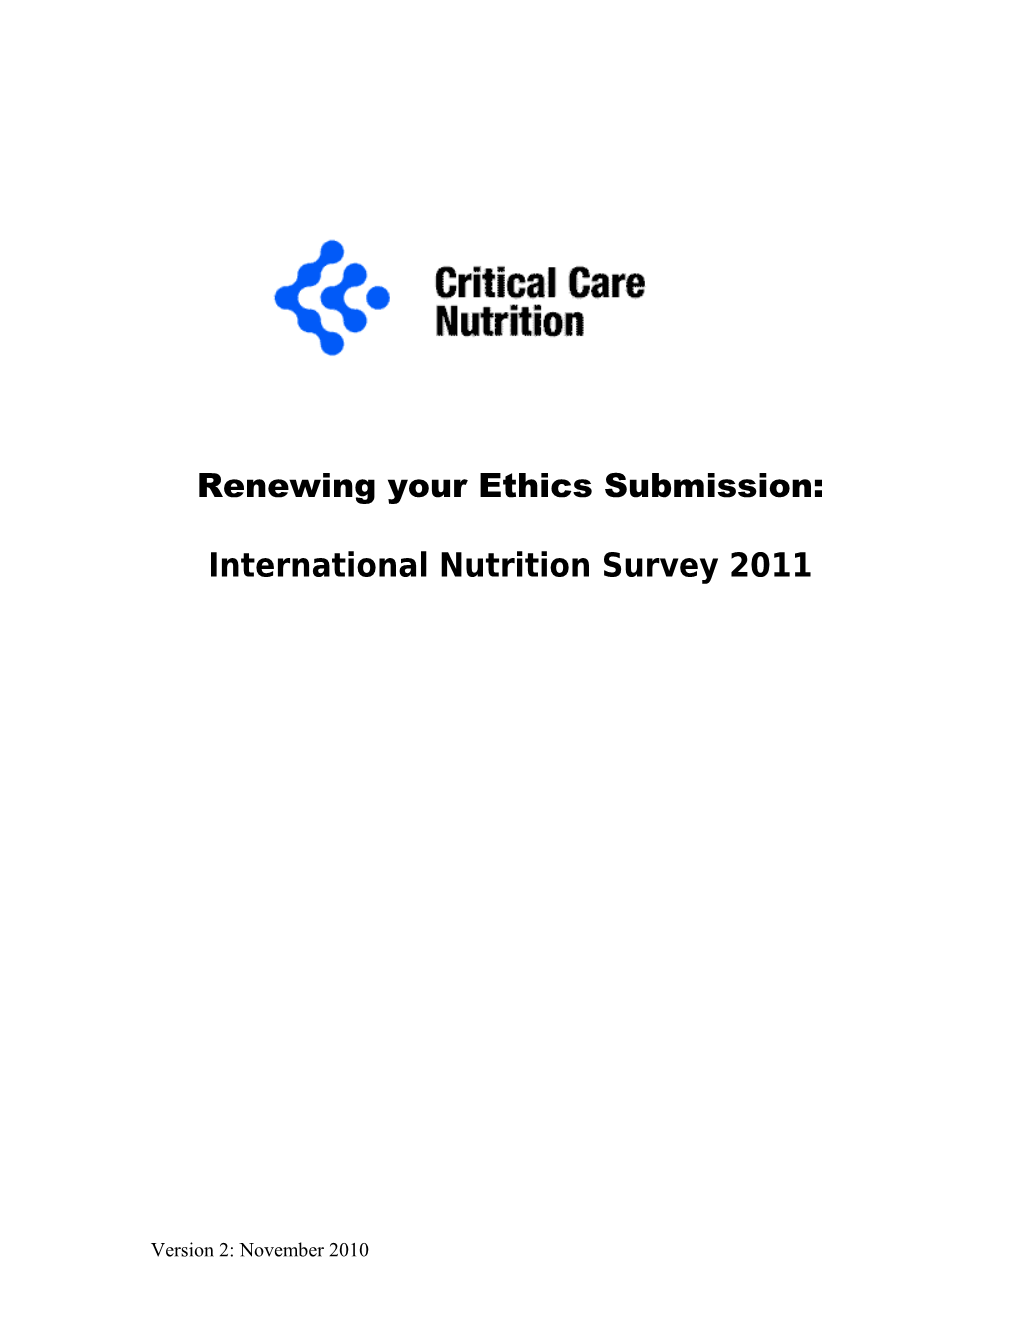 If You Participated in the International Nutrition Survey in 2008, You May Be Looking To